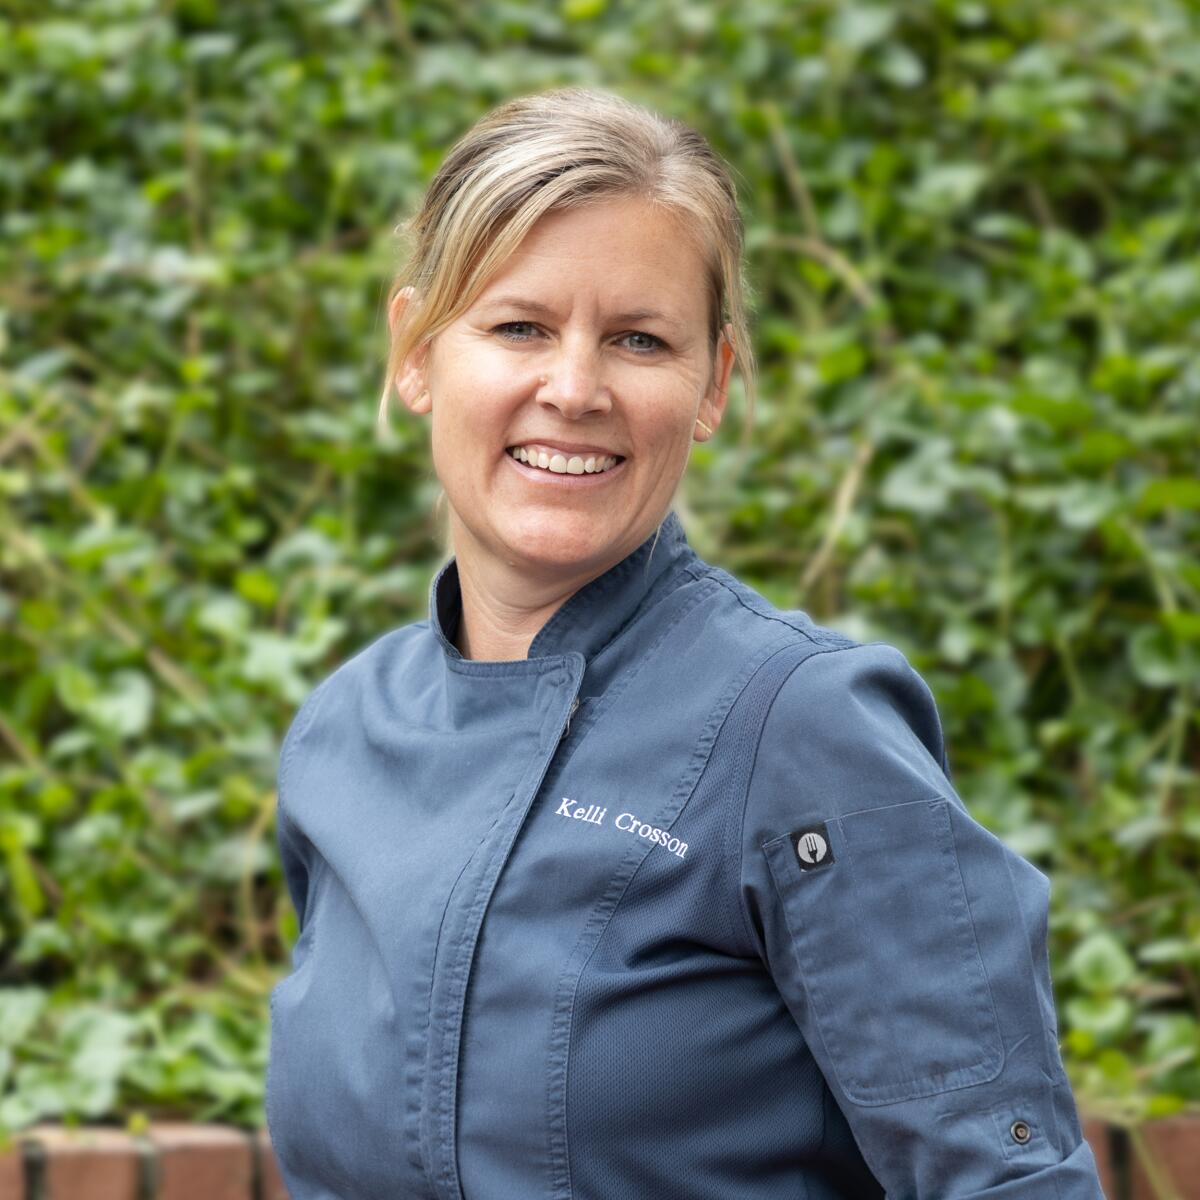 Kelli Crosson will lead the kitchens at The Lodge at Torrey Pines as executive chef.